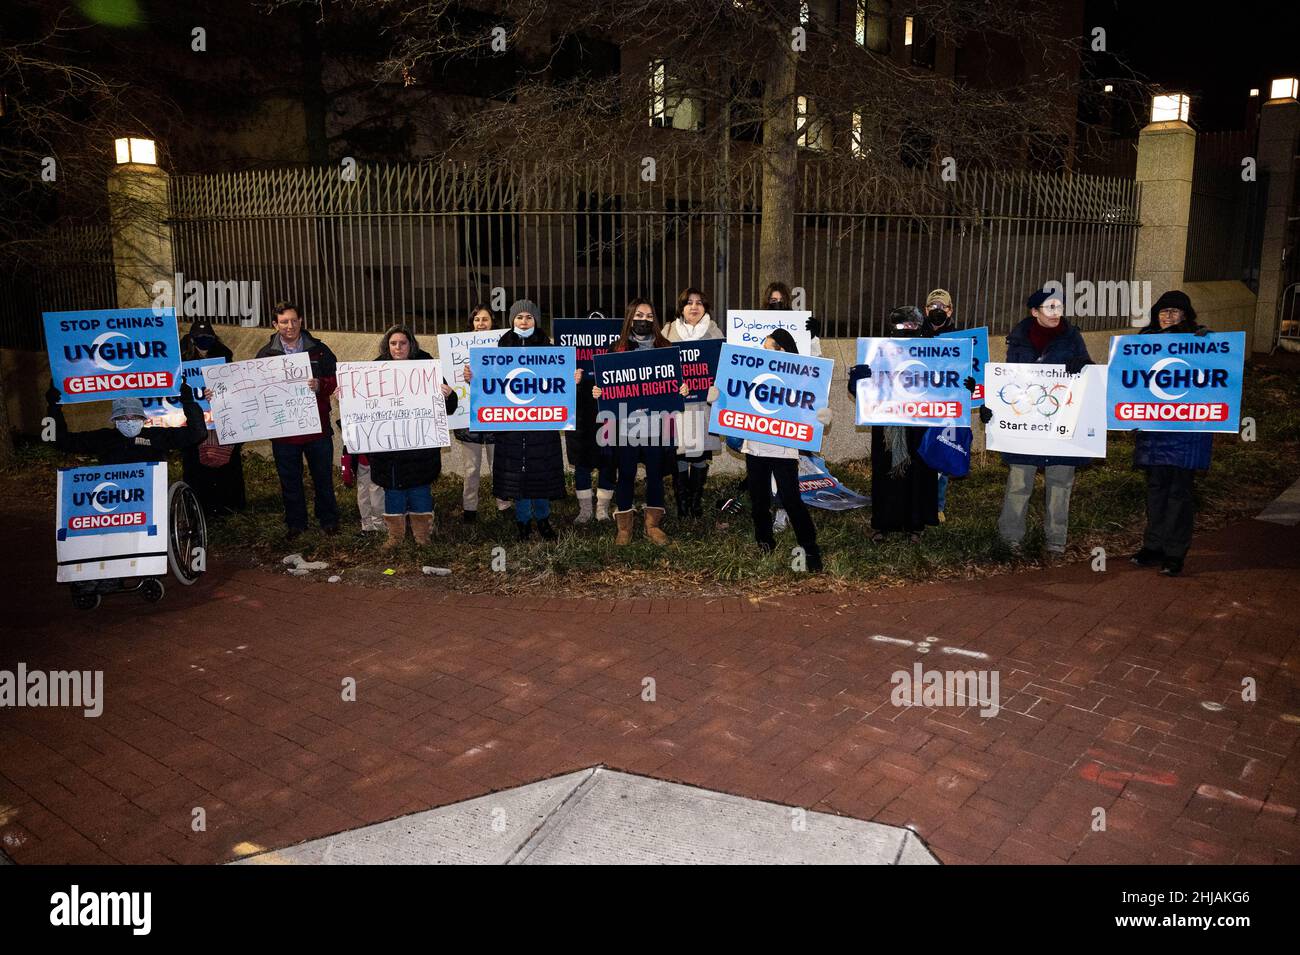 Washington, United States. 27th Jan, 2022. Protesters hold signs that say 'Stop China's Uyghur Genocide' and 'Stand up for Human Rights' at a protest at the Chinese Embassy against the Uyghur genocide and the Beijing Winter Olympics.The Uyghur Crisis Response Team of the Social Action Committee of Congregation Adas Israel in Washington, DC, sponsored the demonstration. Credit: SOPA Images Limited/Alamy Live News Stock Photo